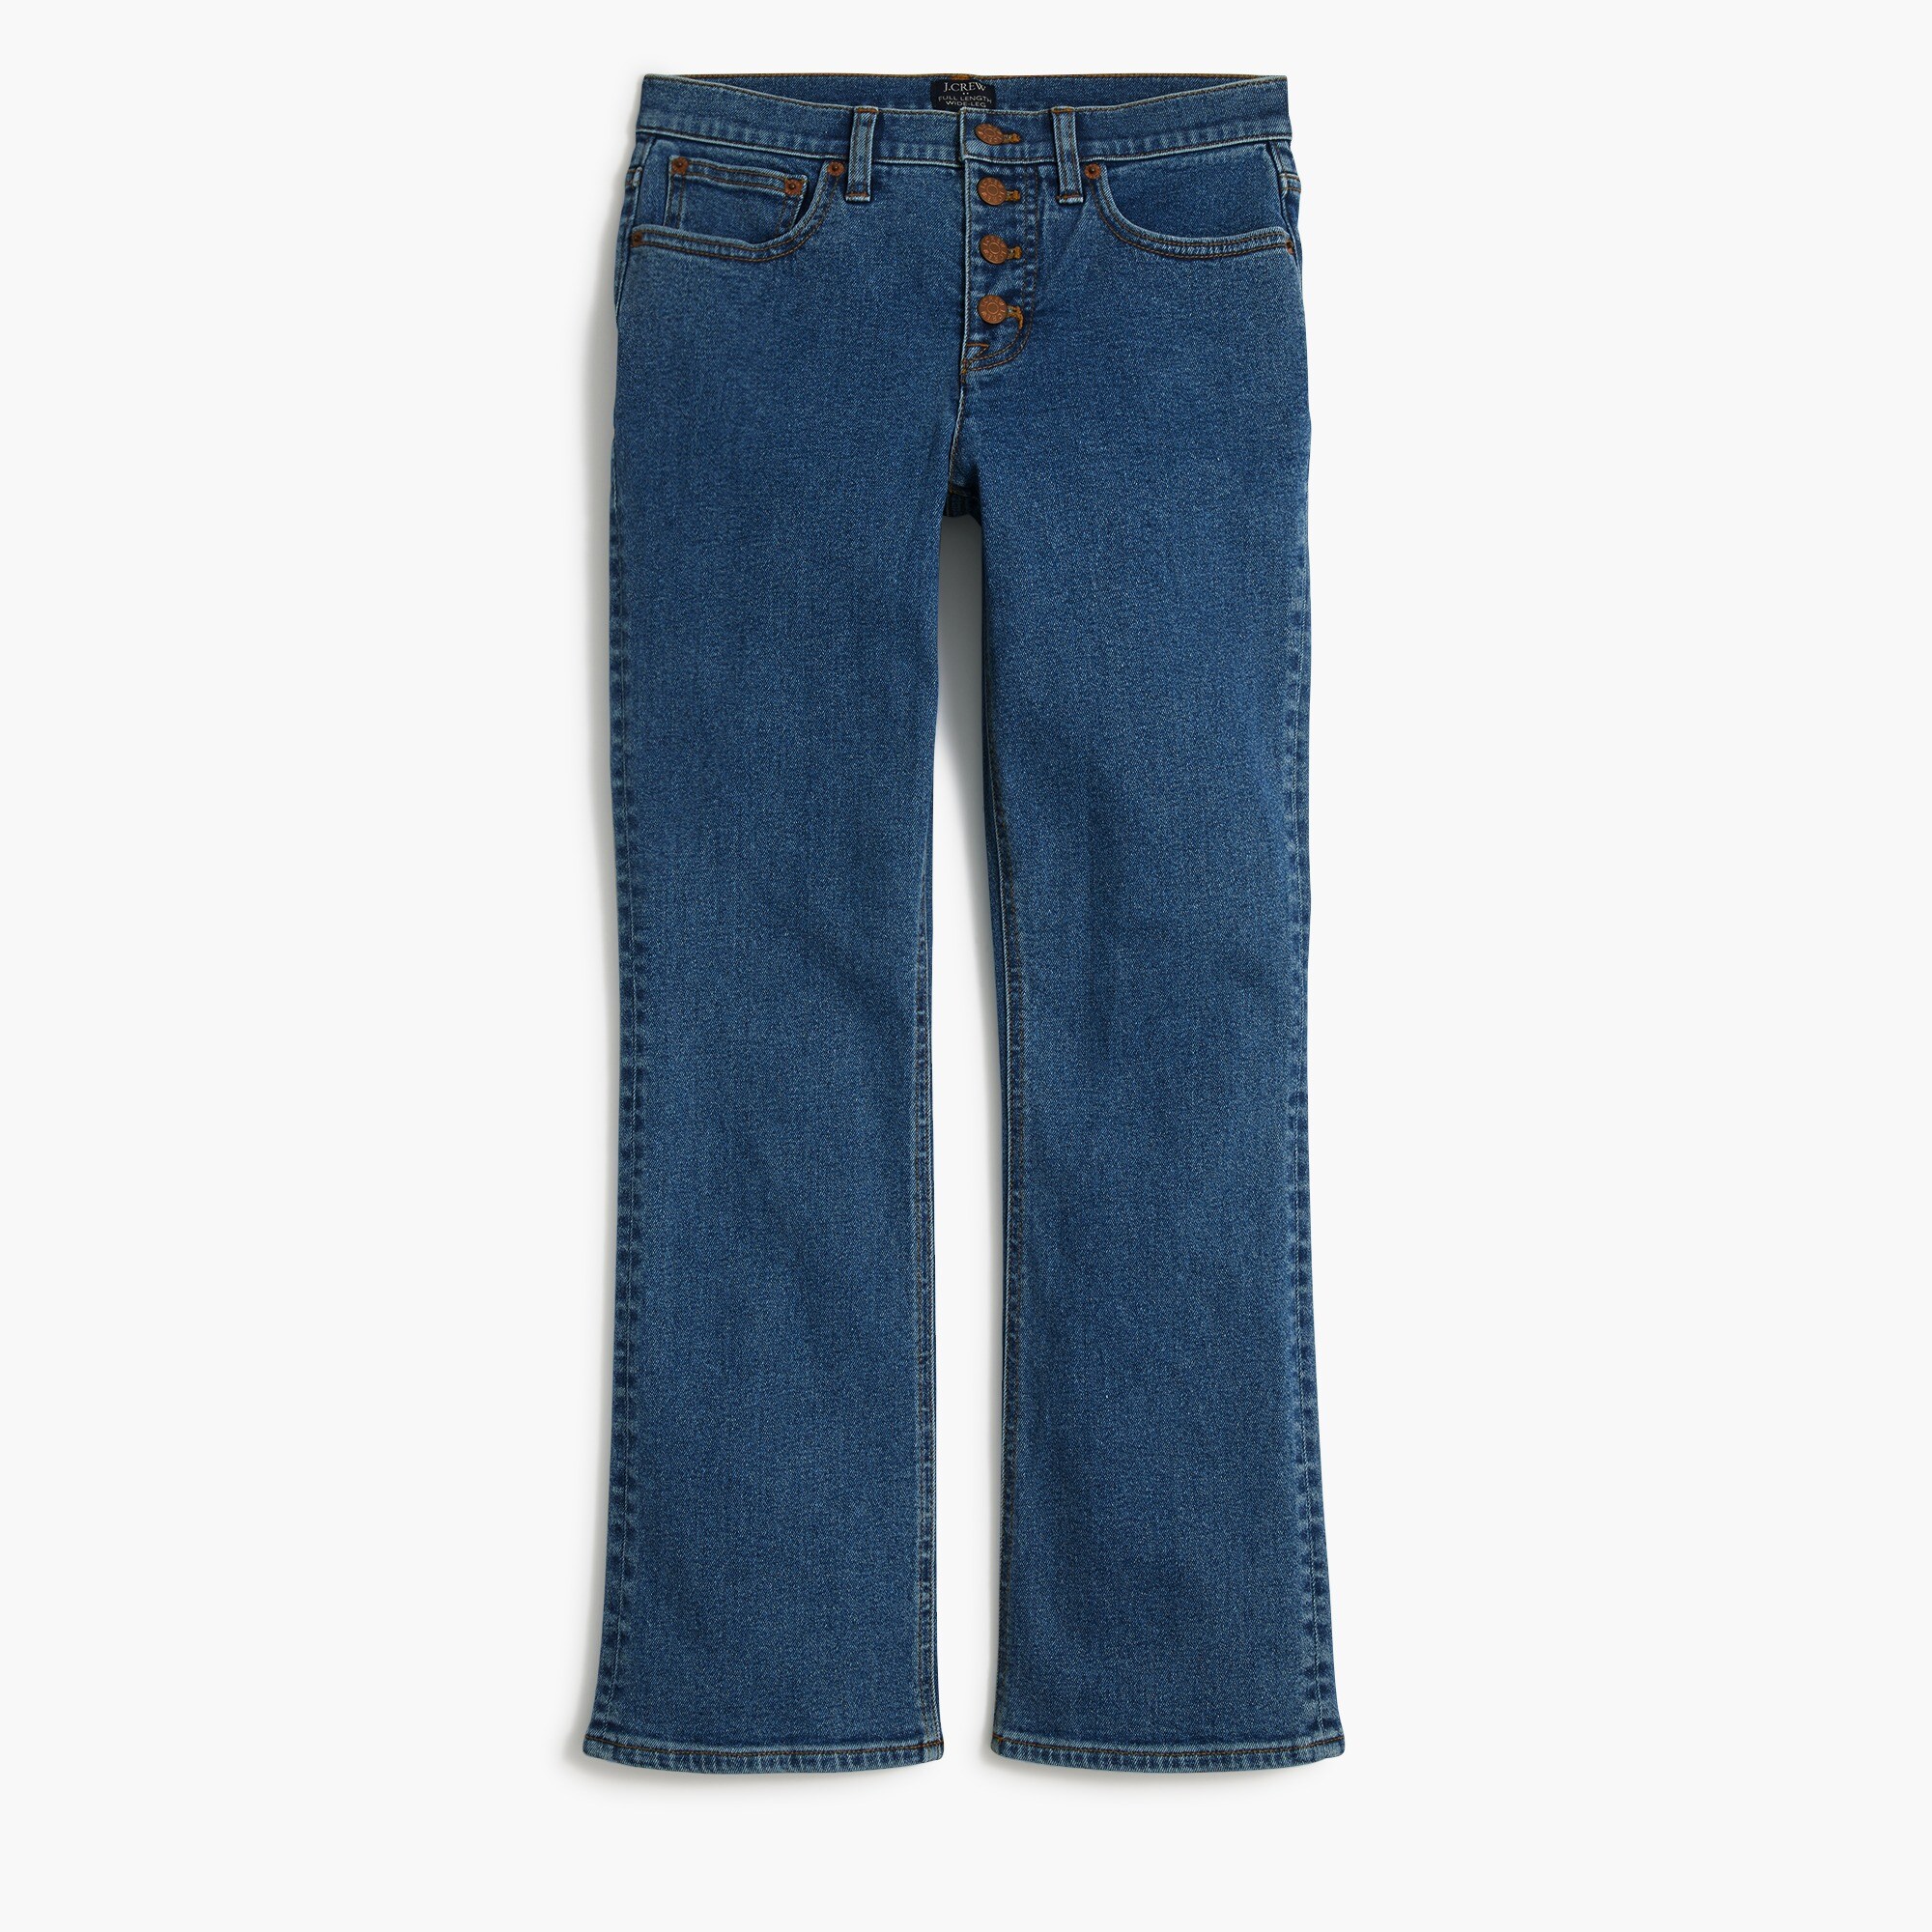  Flare crop mid-rise jean in all-day stretch